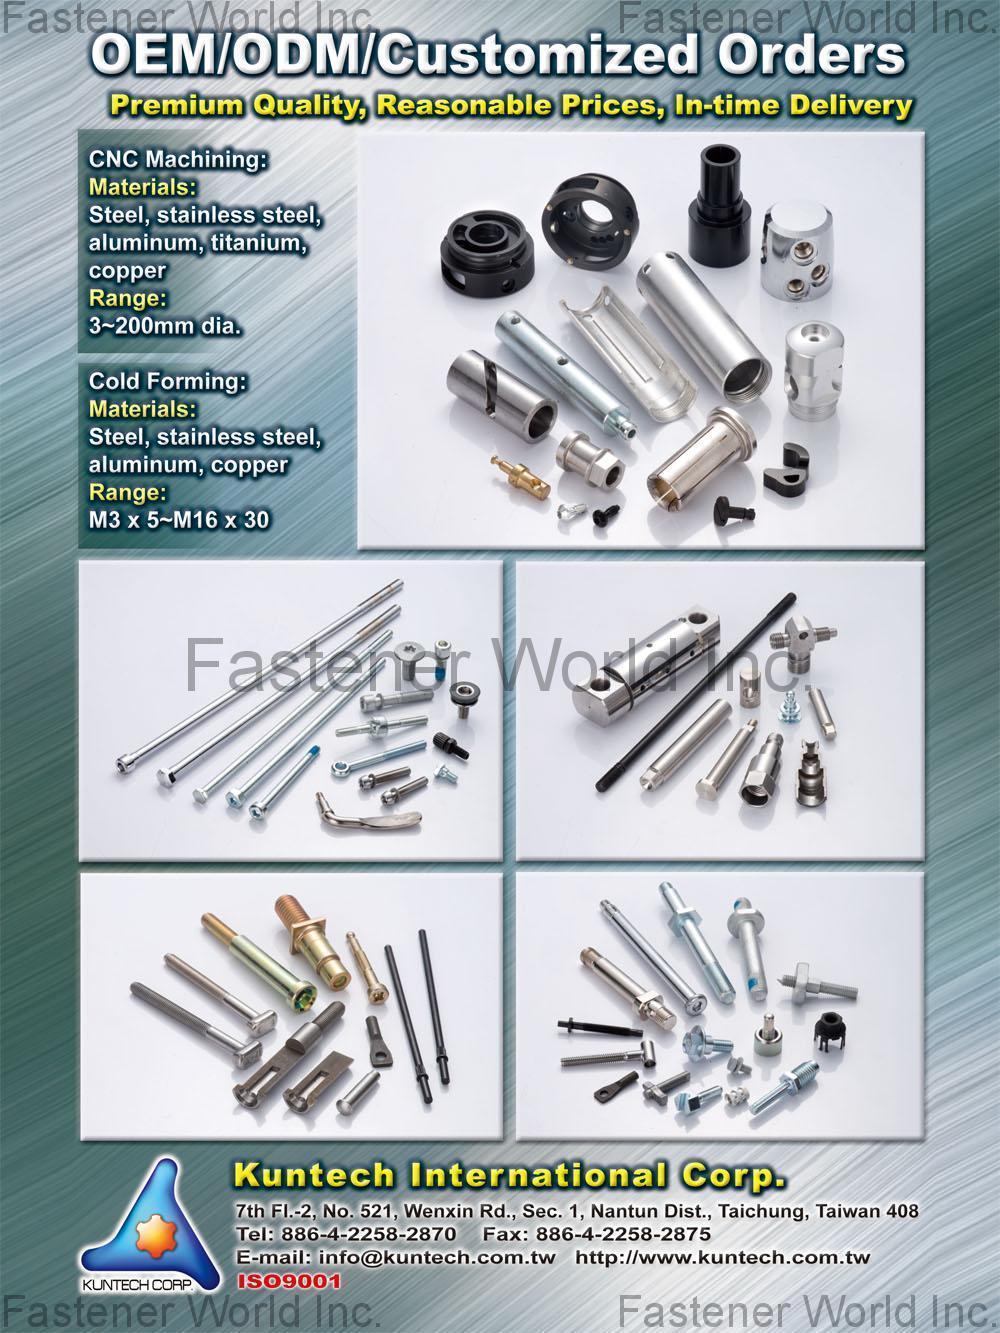 KUNTECH INTERNATIONAL CORP. , Standard, Customized Fasteners and Special Hardware, CNC Machining, Cold-Forming , Other Hardware Equipment / Accessories / Products